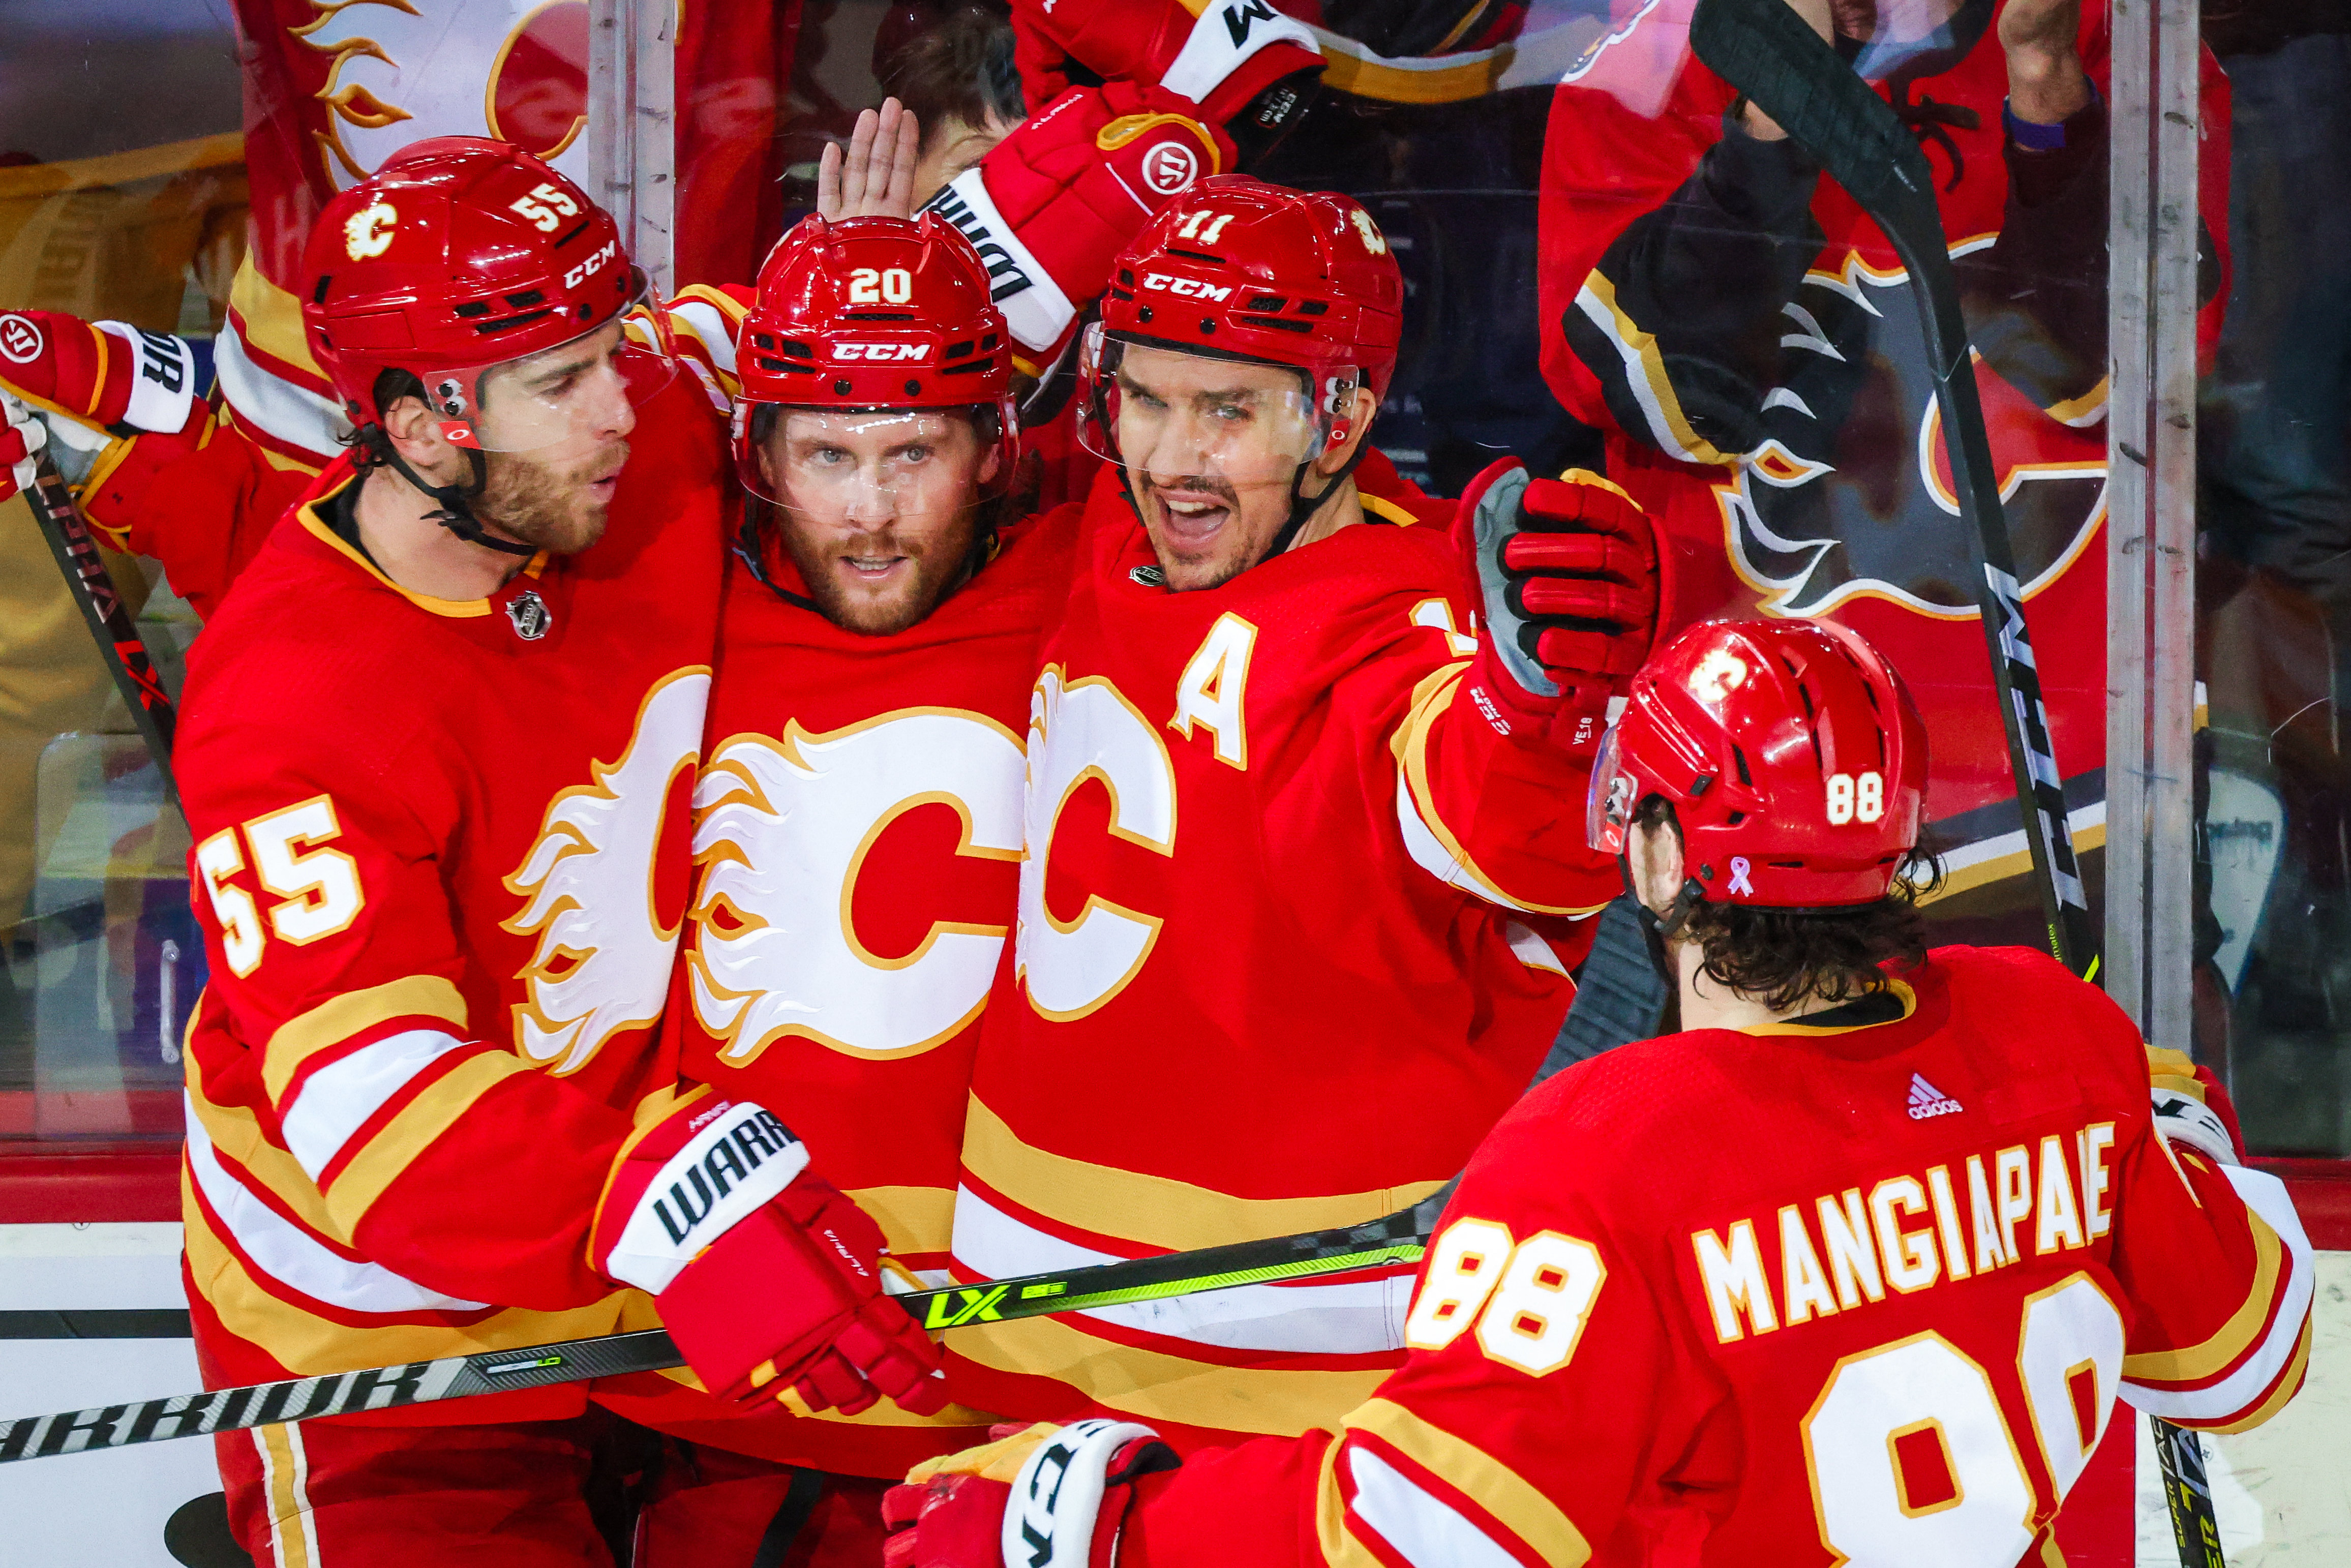 NHL playoffs: Flames set NHL record in wild 9-6 win vs. Oilers